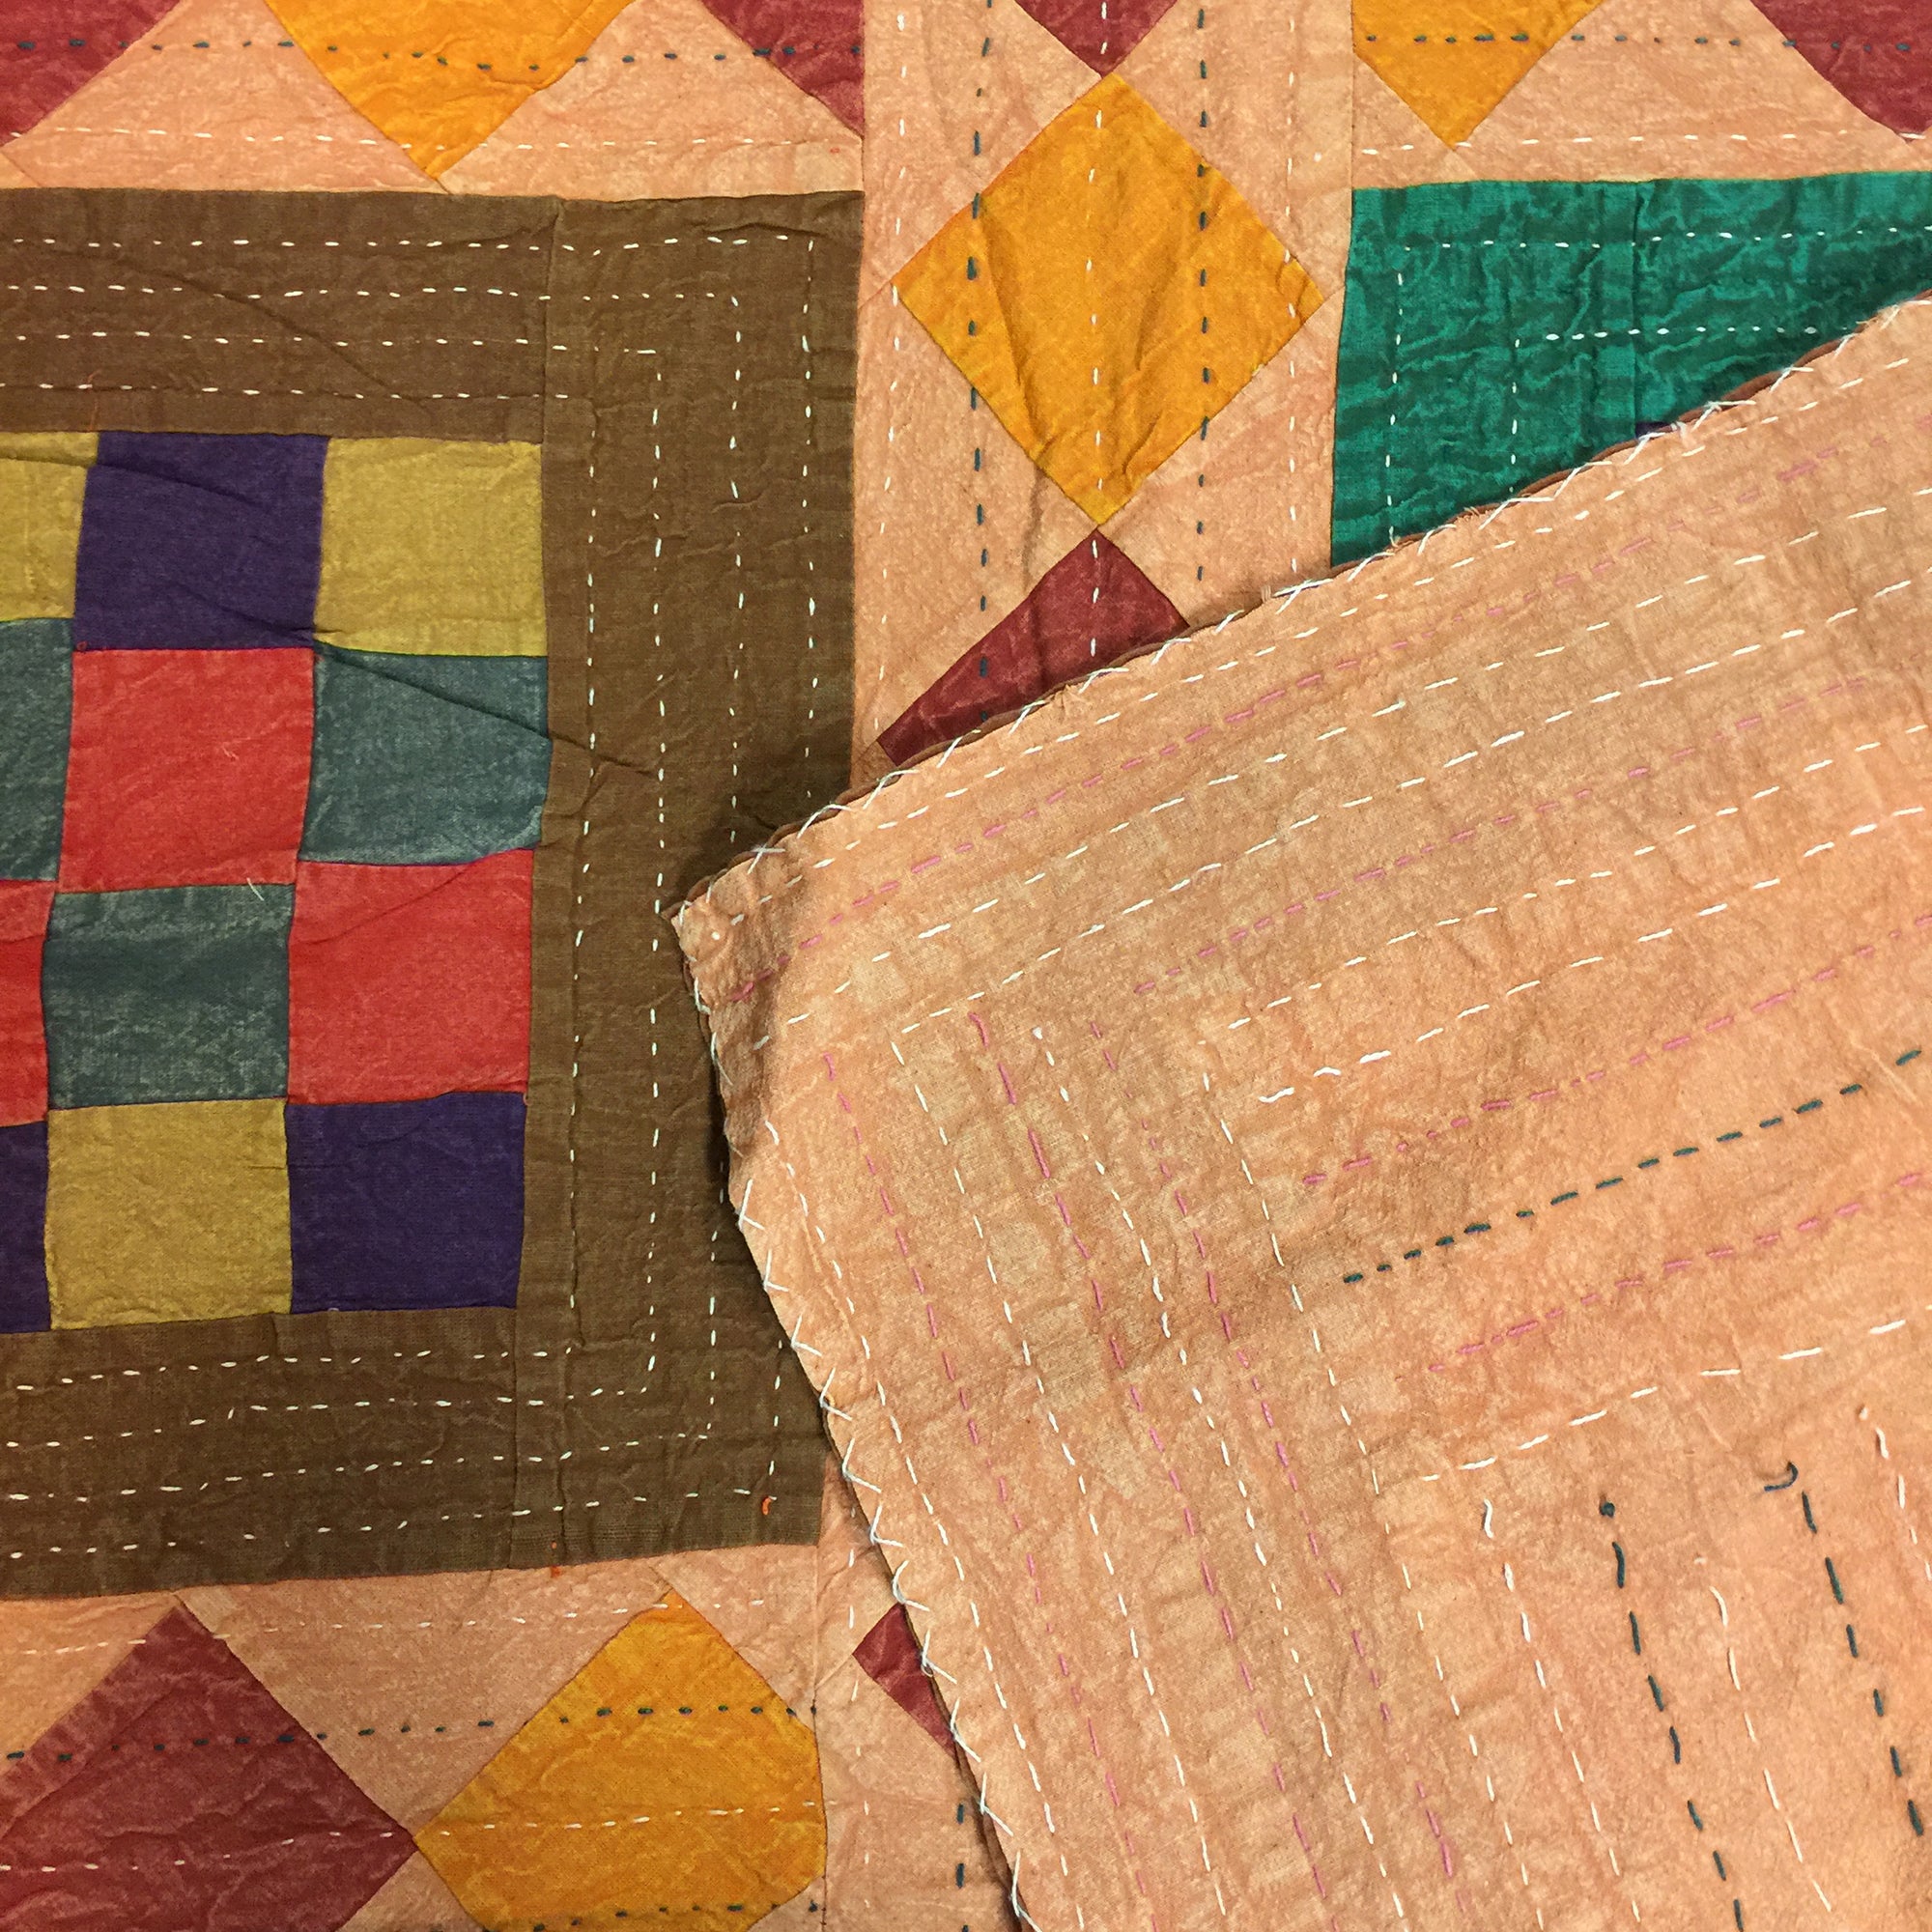 Checkered Patchwork Kantha Quilt-6 colors - Vintage India NYC